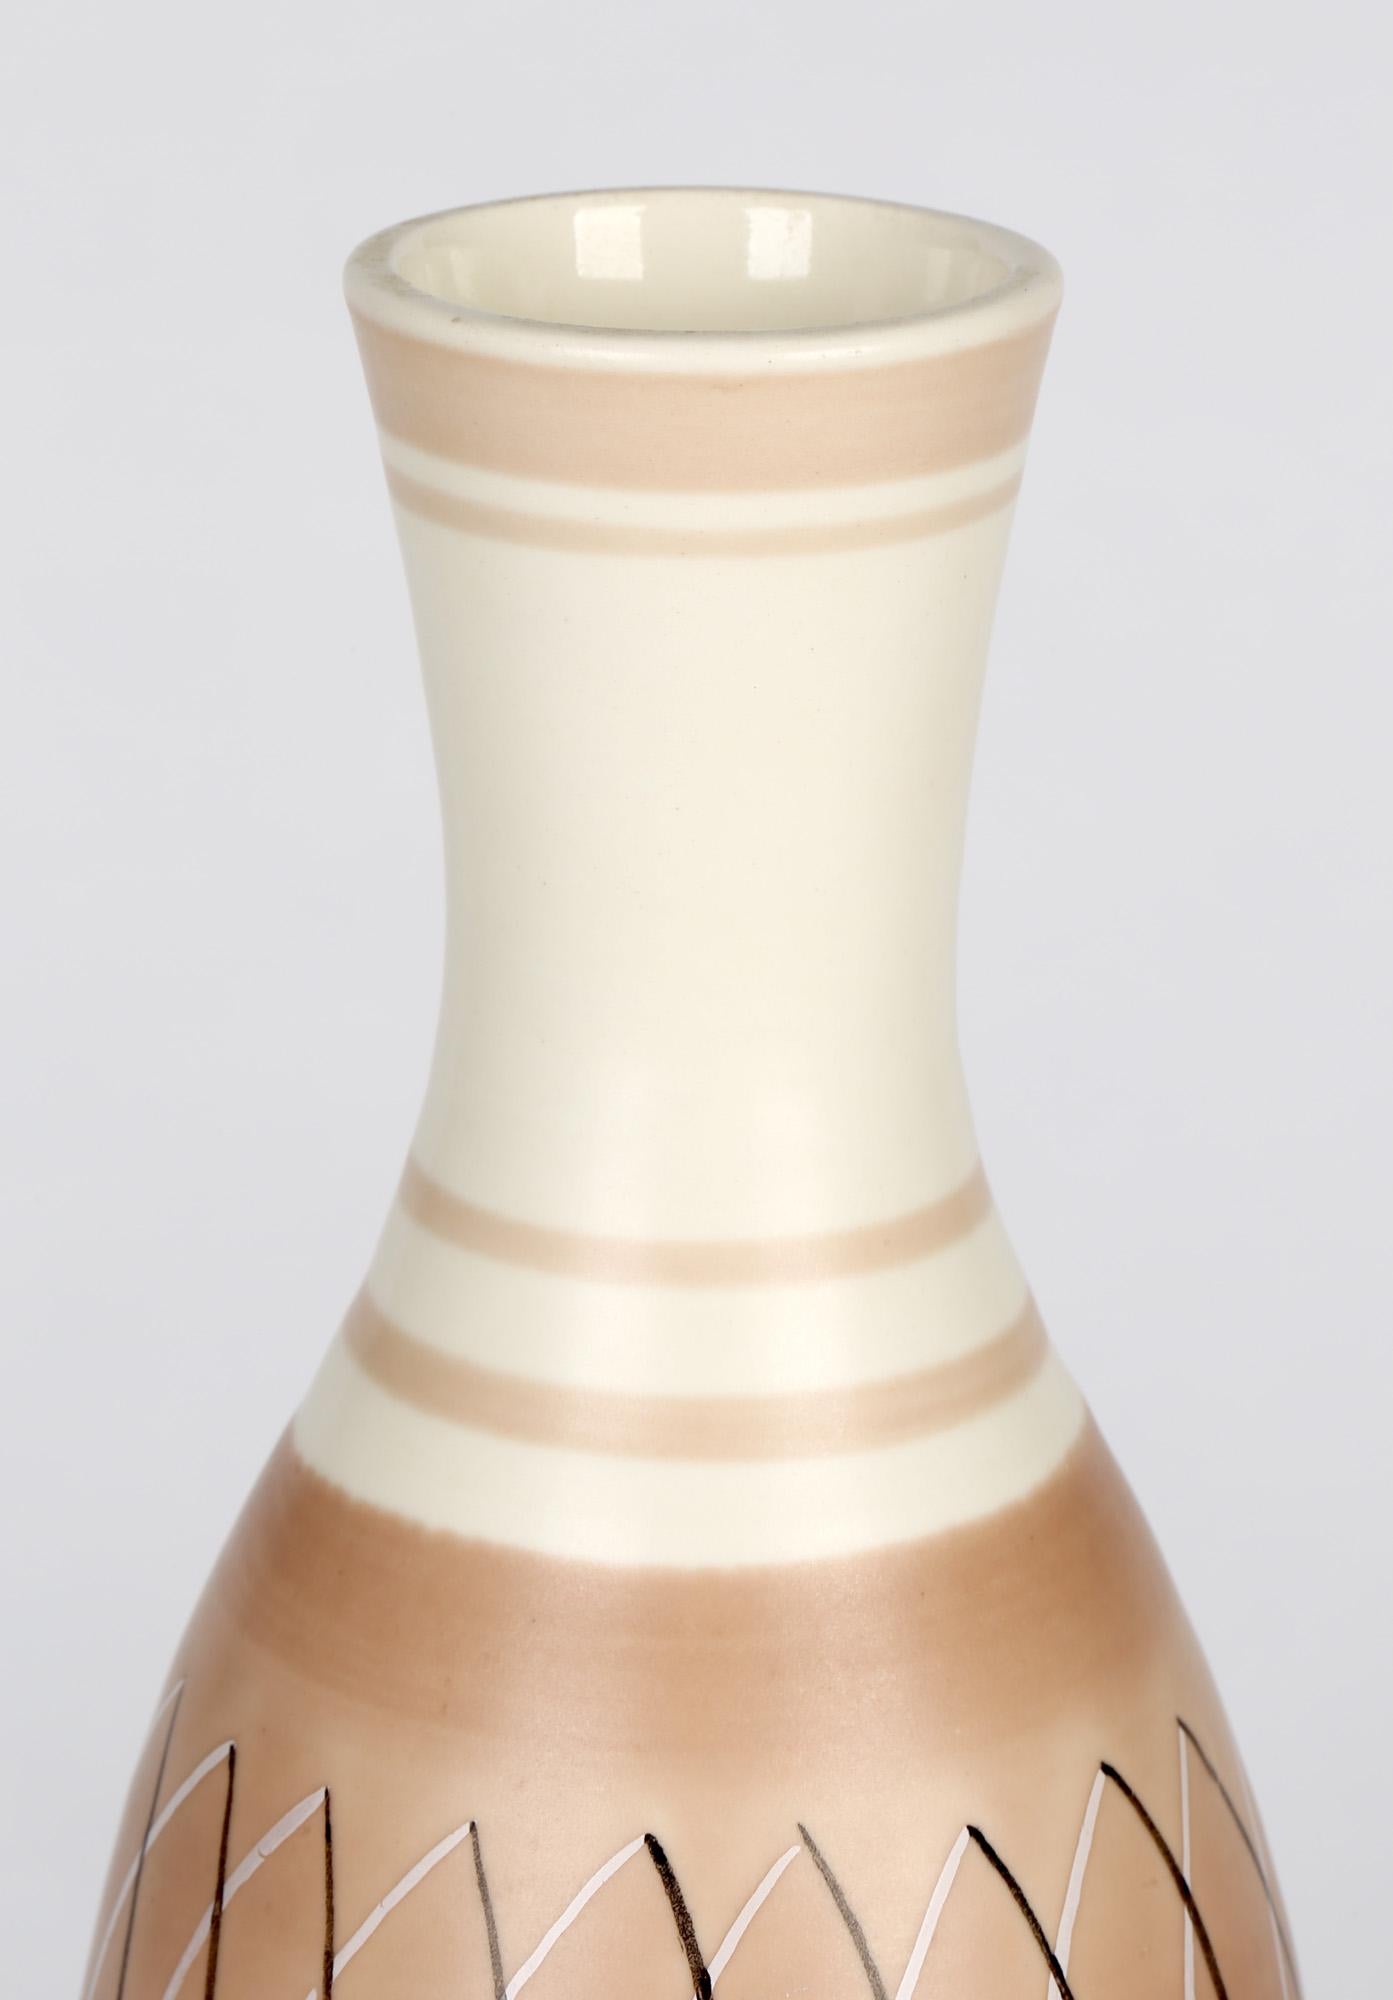 Alfred Burgess Read Mid-Century Poole Pottery Vase in PRB Pattern In Good Condition For Sale In Bishop's Stortford, Hertfordshire